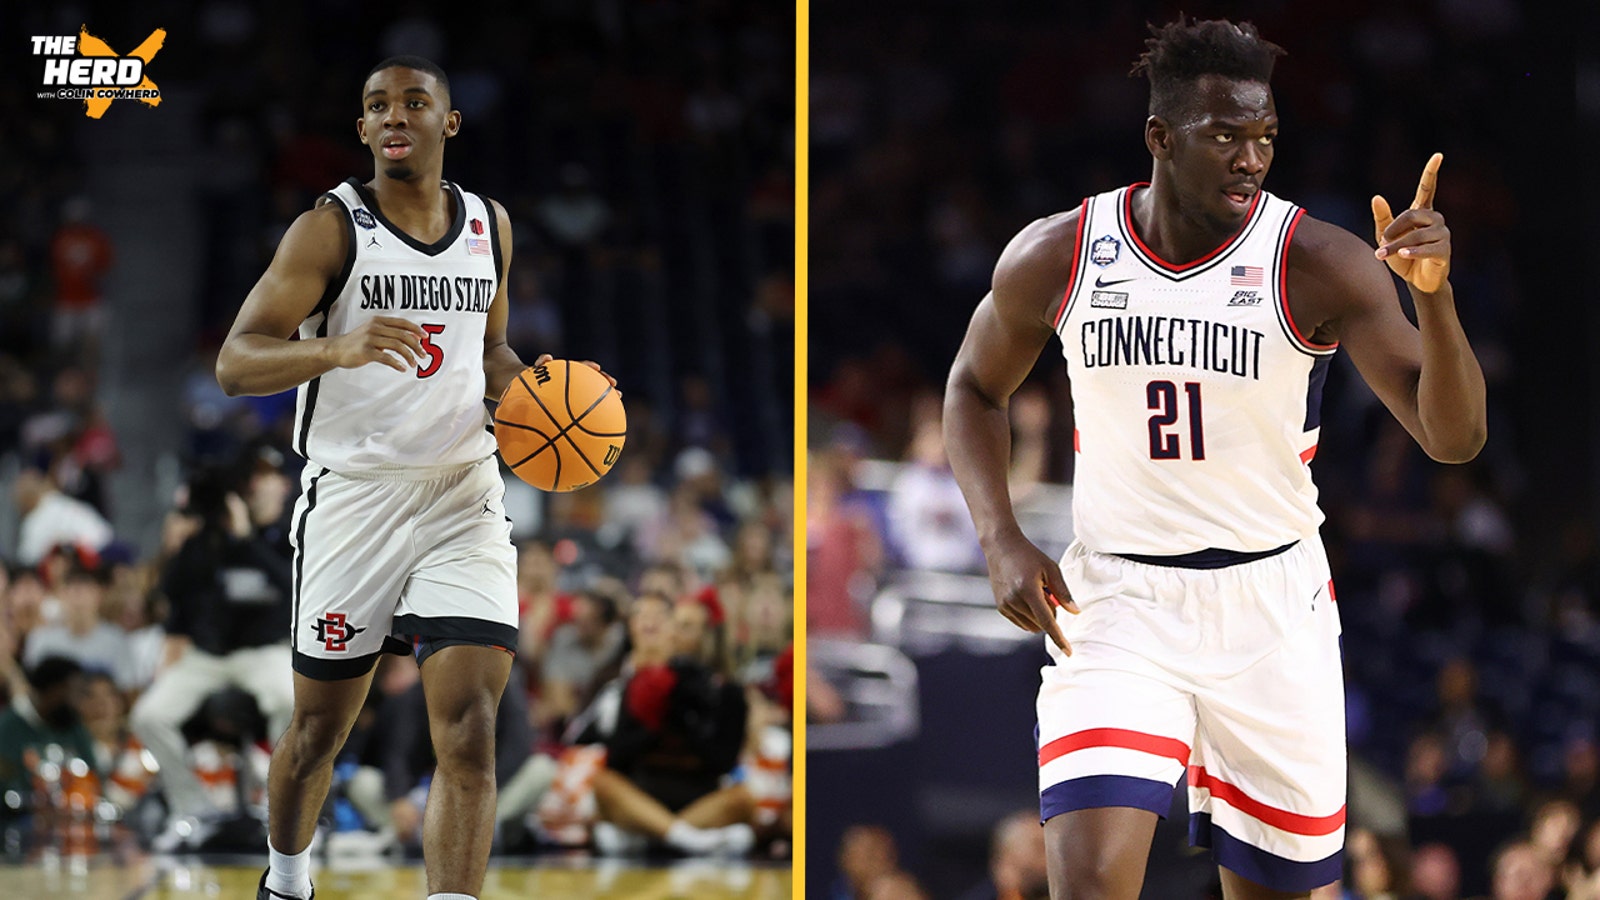 No. 4 UCONN to face No. 5 San Diego State in NCAA Men's Championship Game